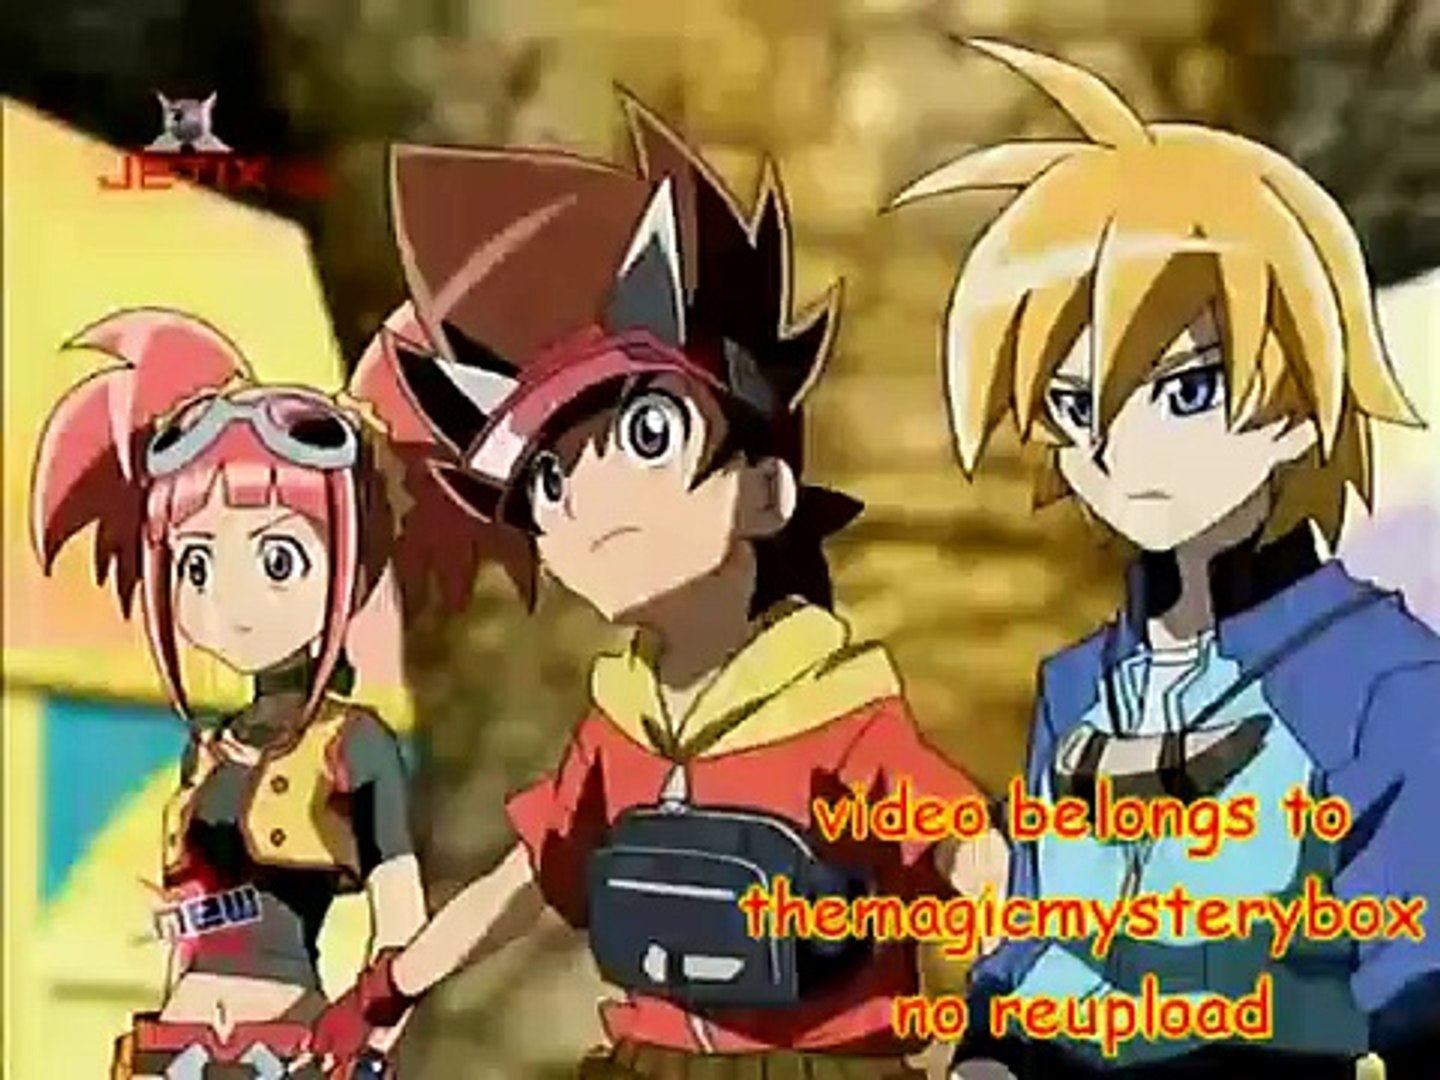 221 - Dinosaur King malice in the palace part 2 - video Dailymotion